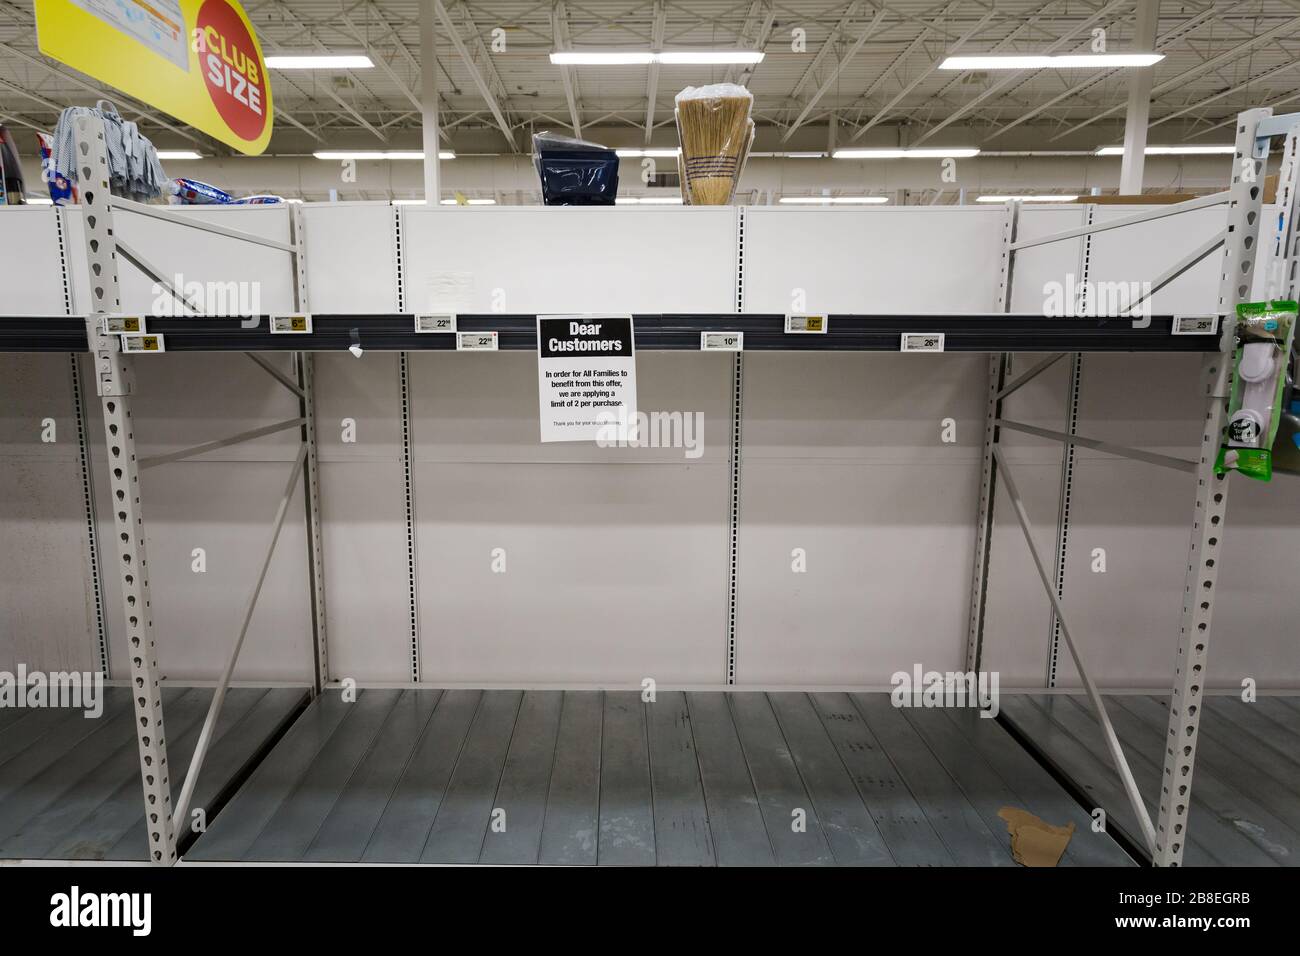 NORTH VANCOUVER, BC, CANADA - MAR 19, 2020: An empty shelf at a supermarket as panic buying grips the world as the virus spreads. Stock Photo